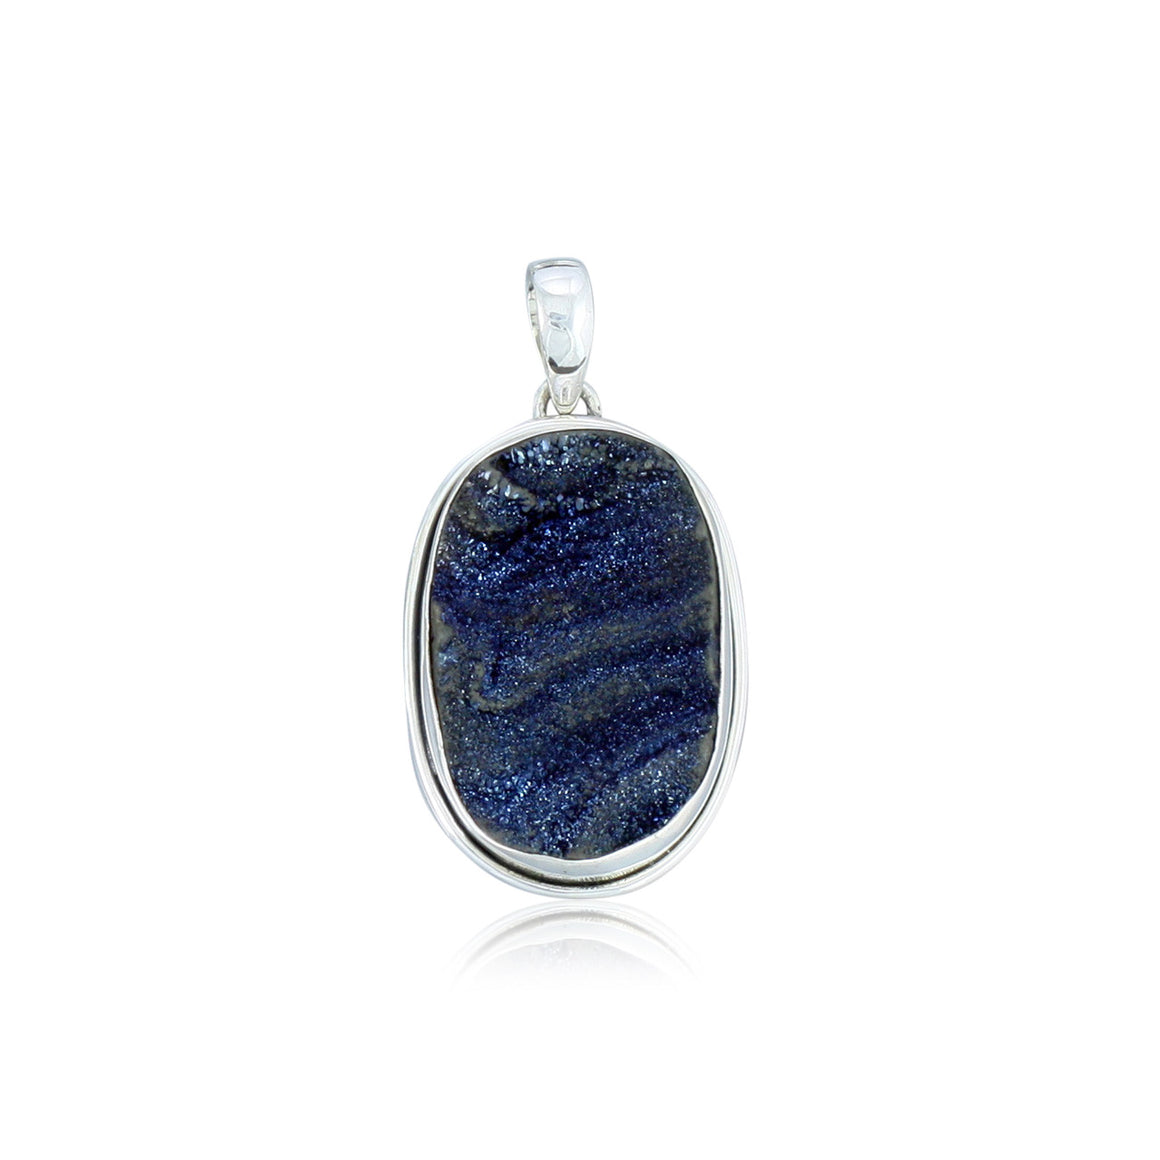 Blue Desert Drusy Pendant - One of a Kind